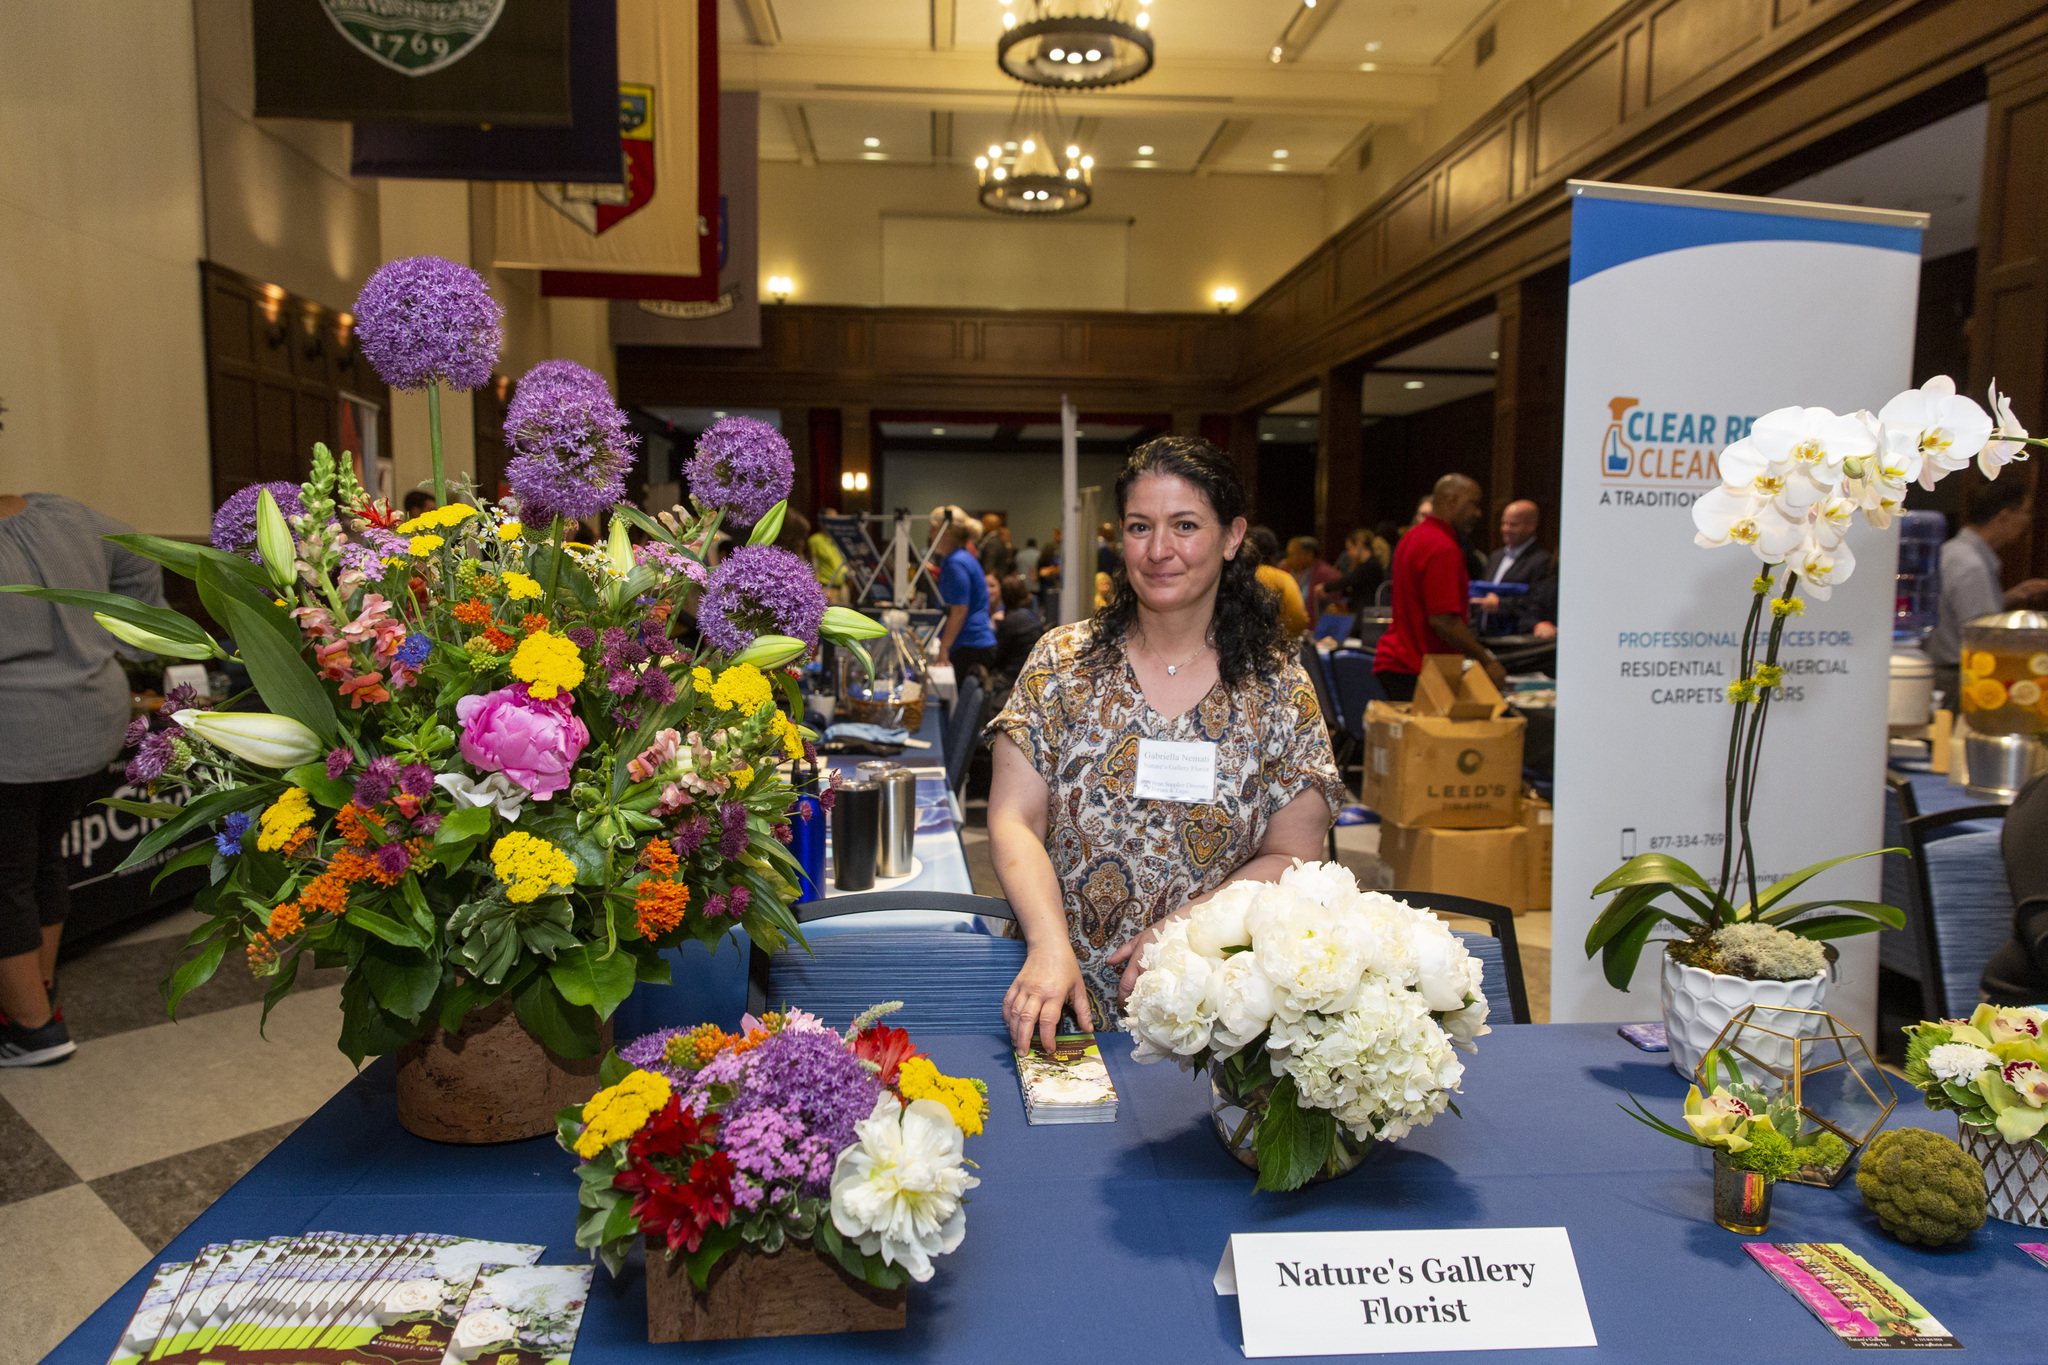 Gabriella Nemati, of Nature’s Gallery Florist, at her table at the expo